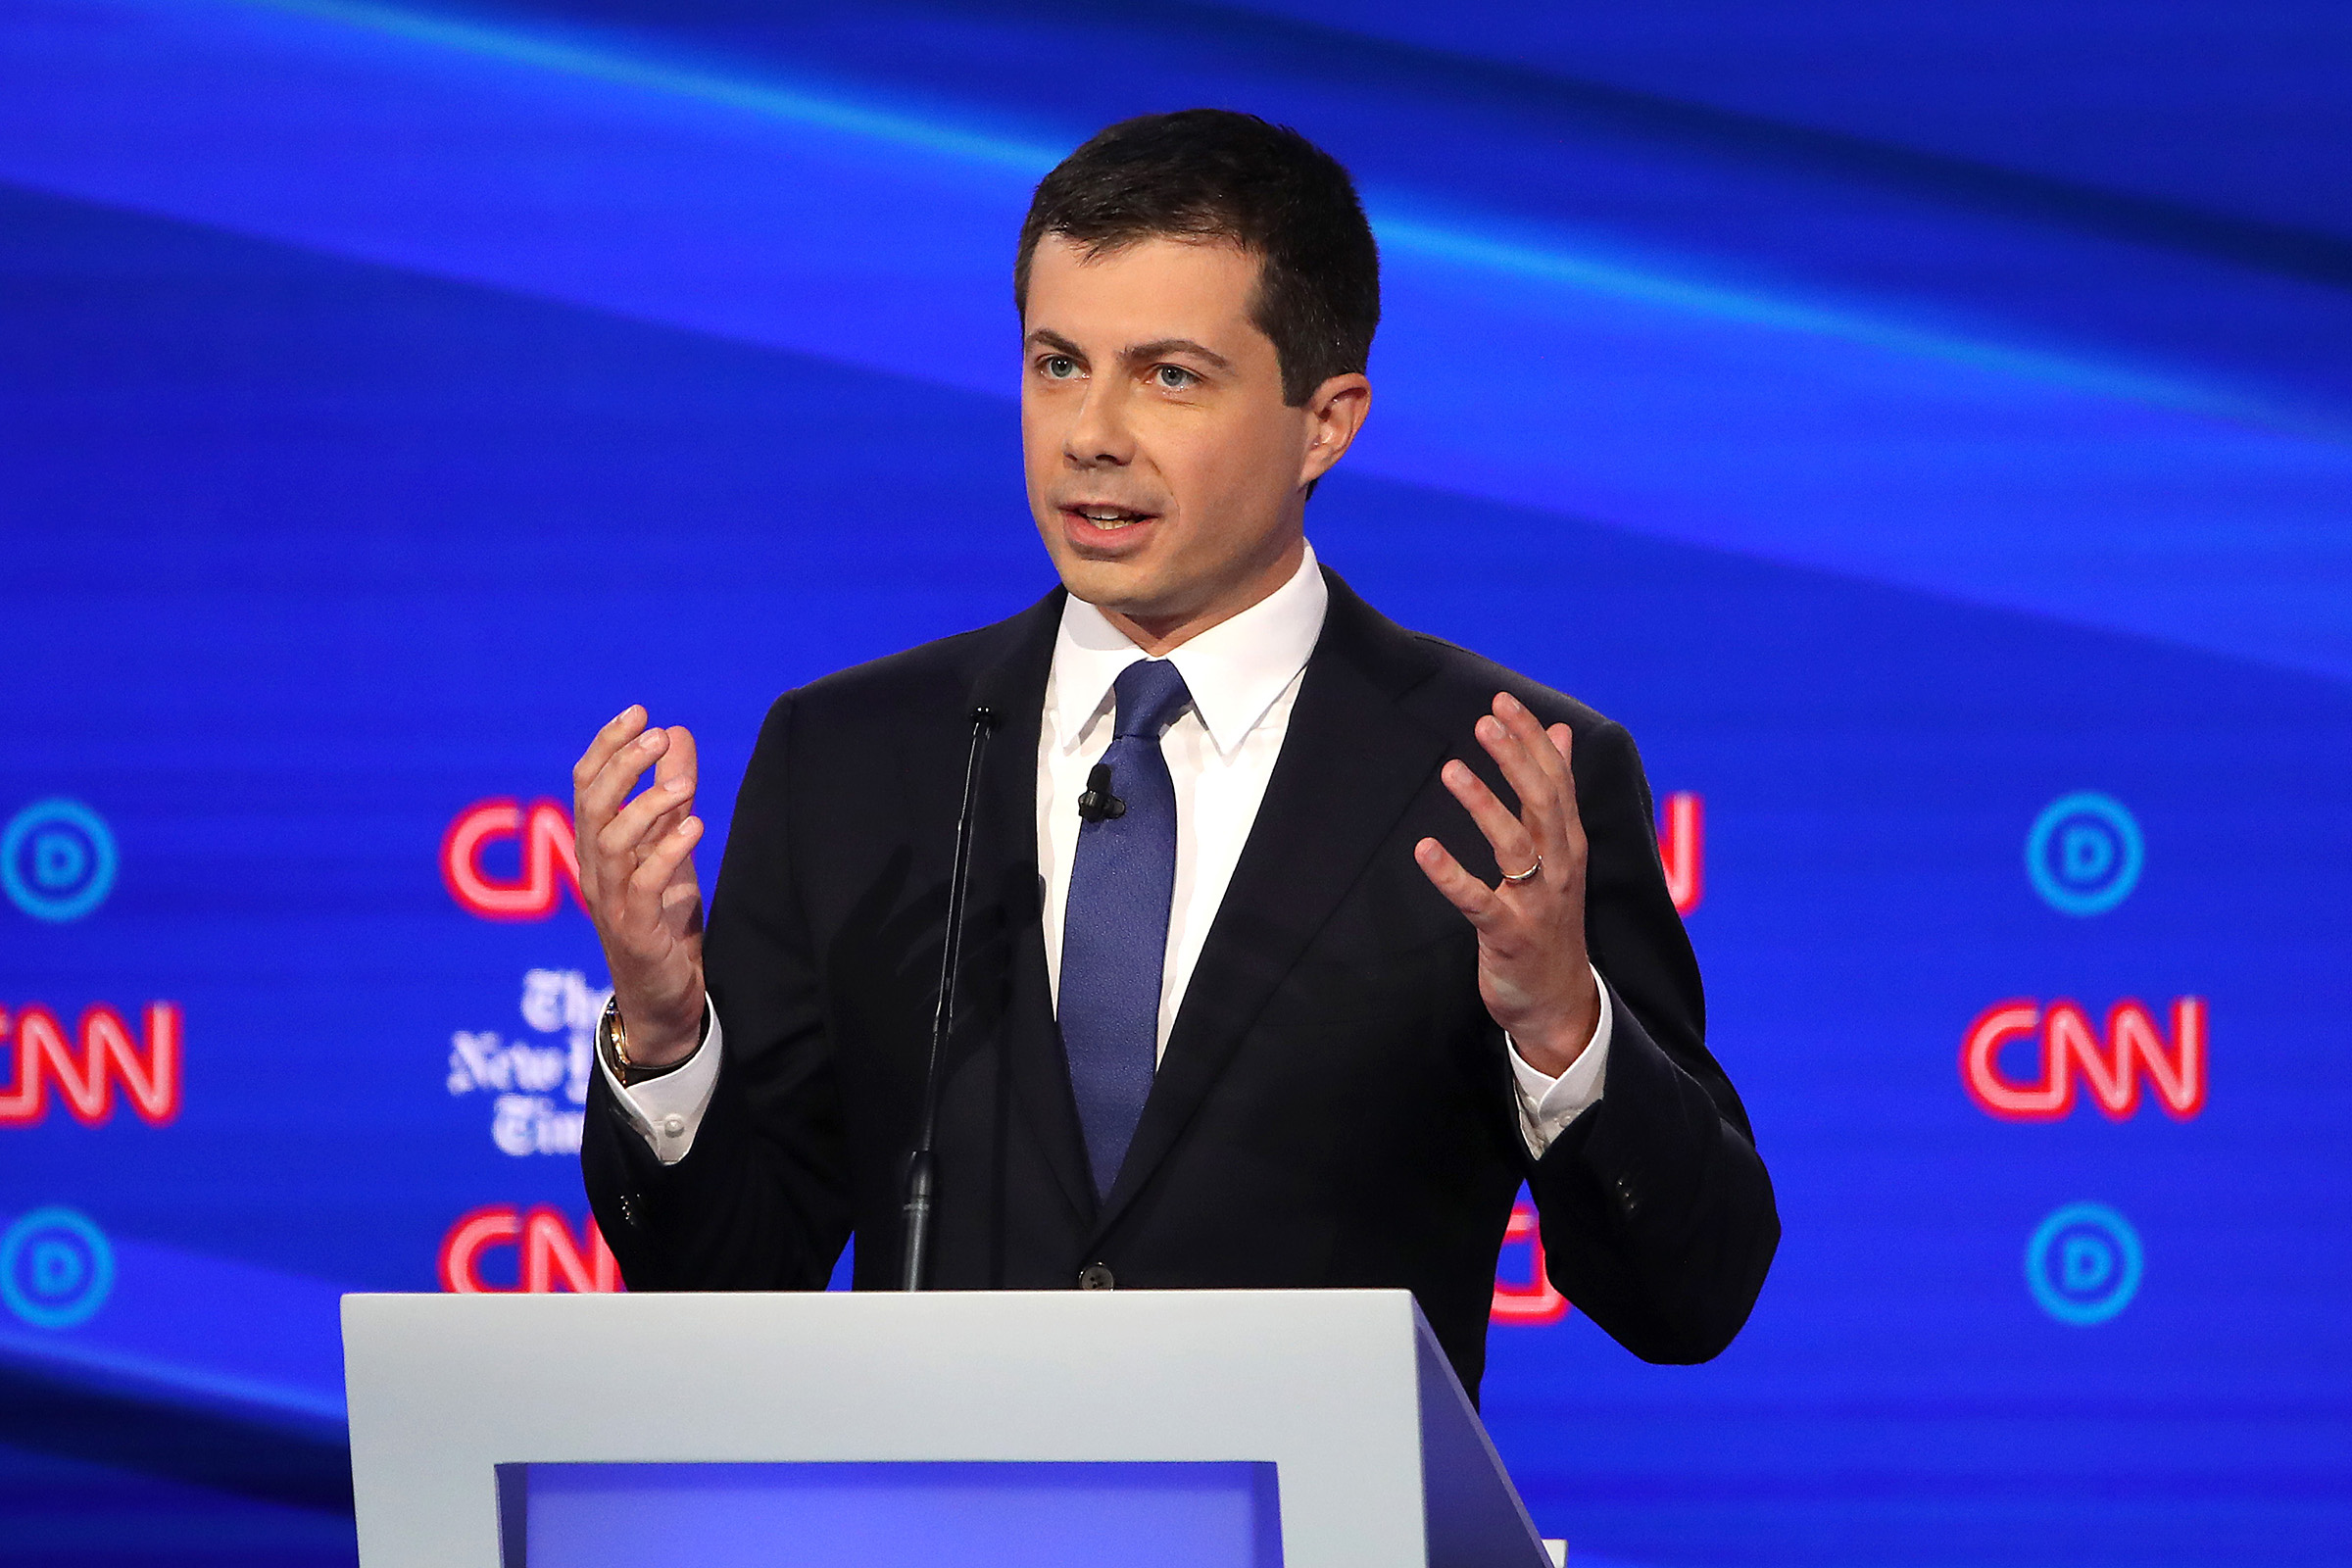 South Bend, Indiana Mayor Pete Buttigieg speaks during the Democratic Presidential Debate at Otterbein University on Oct. 15, 2019 in Westerville, Ohio. (Win McNamee—Getty Images)